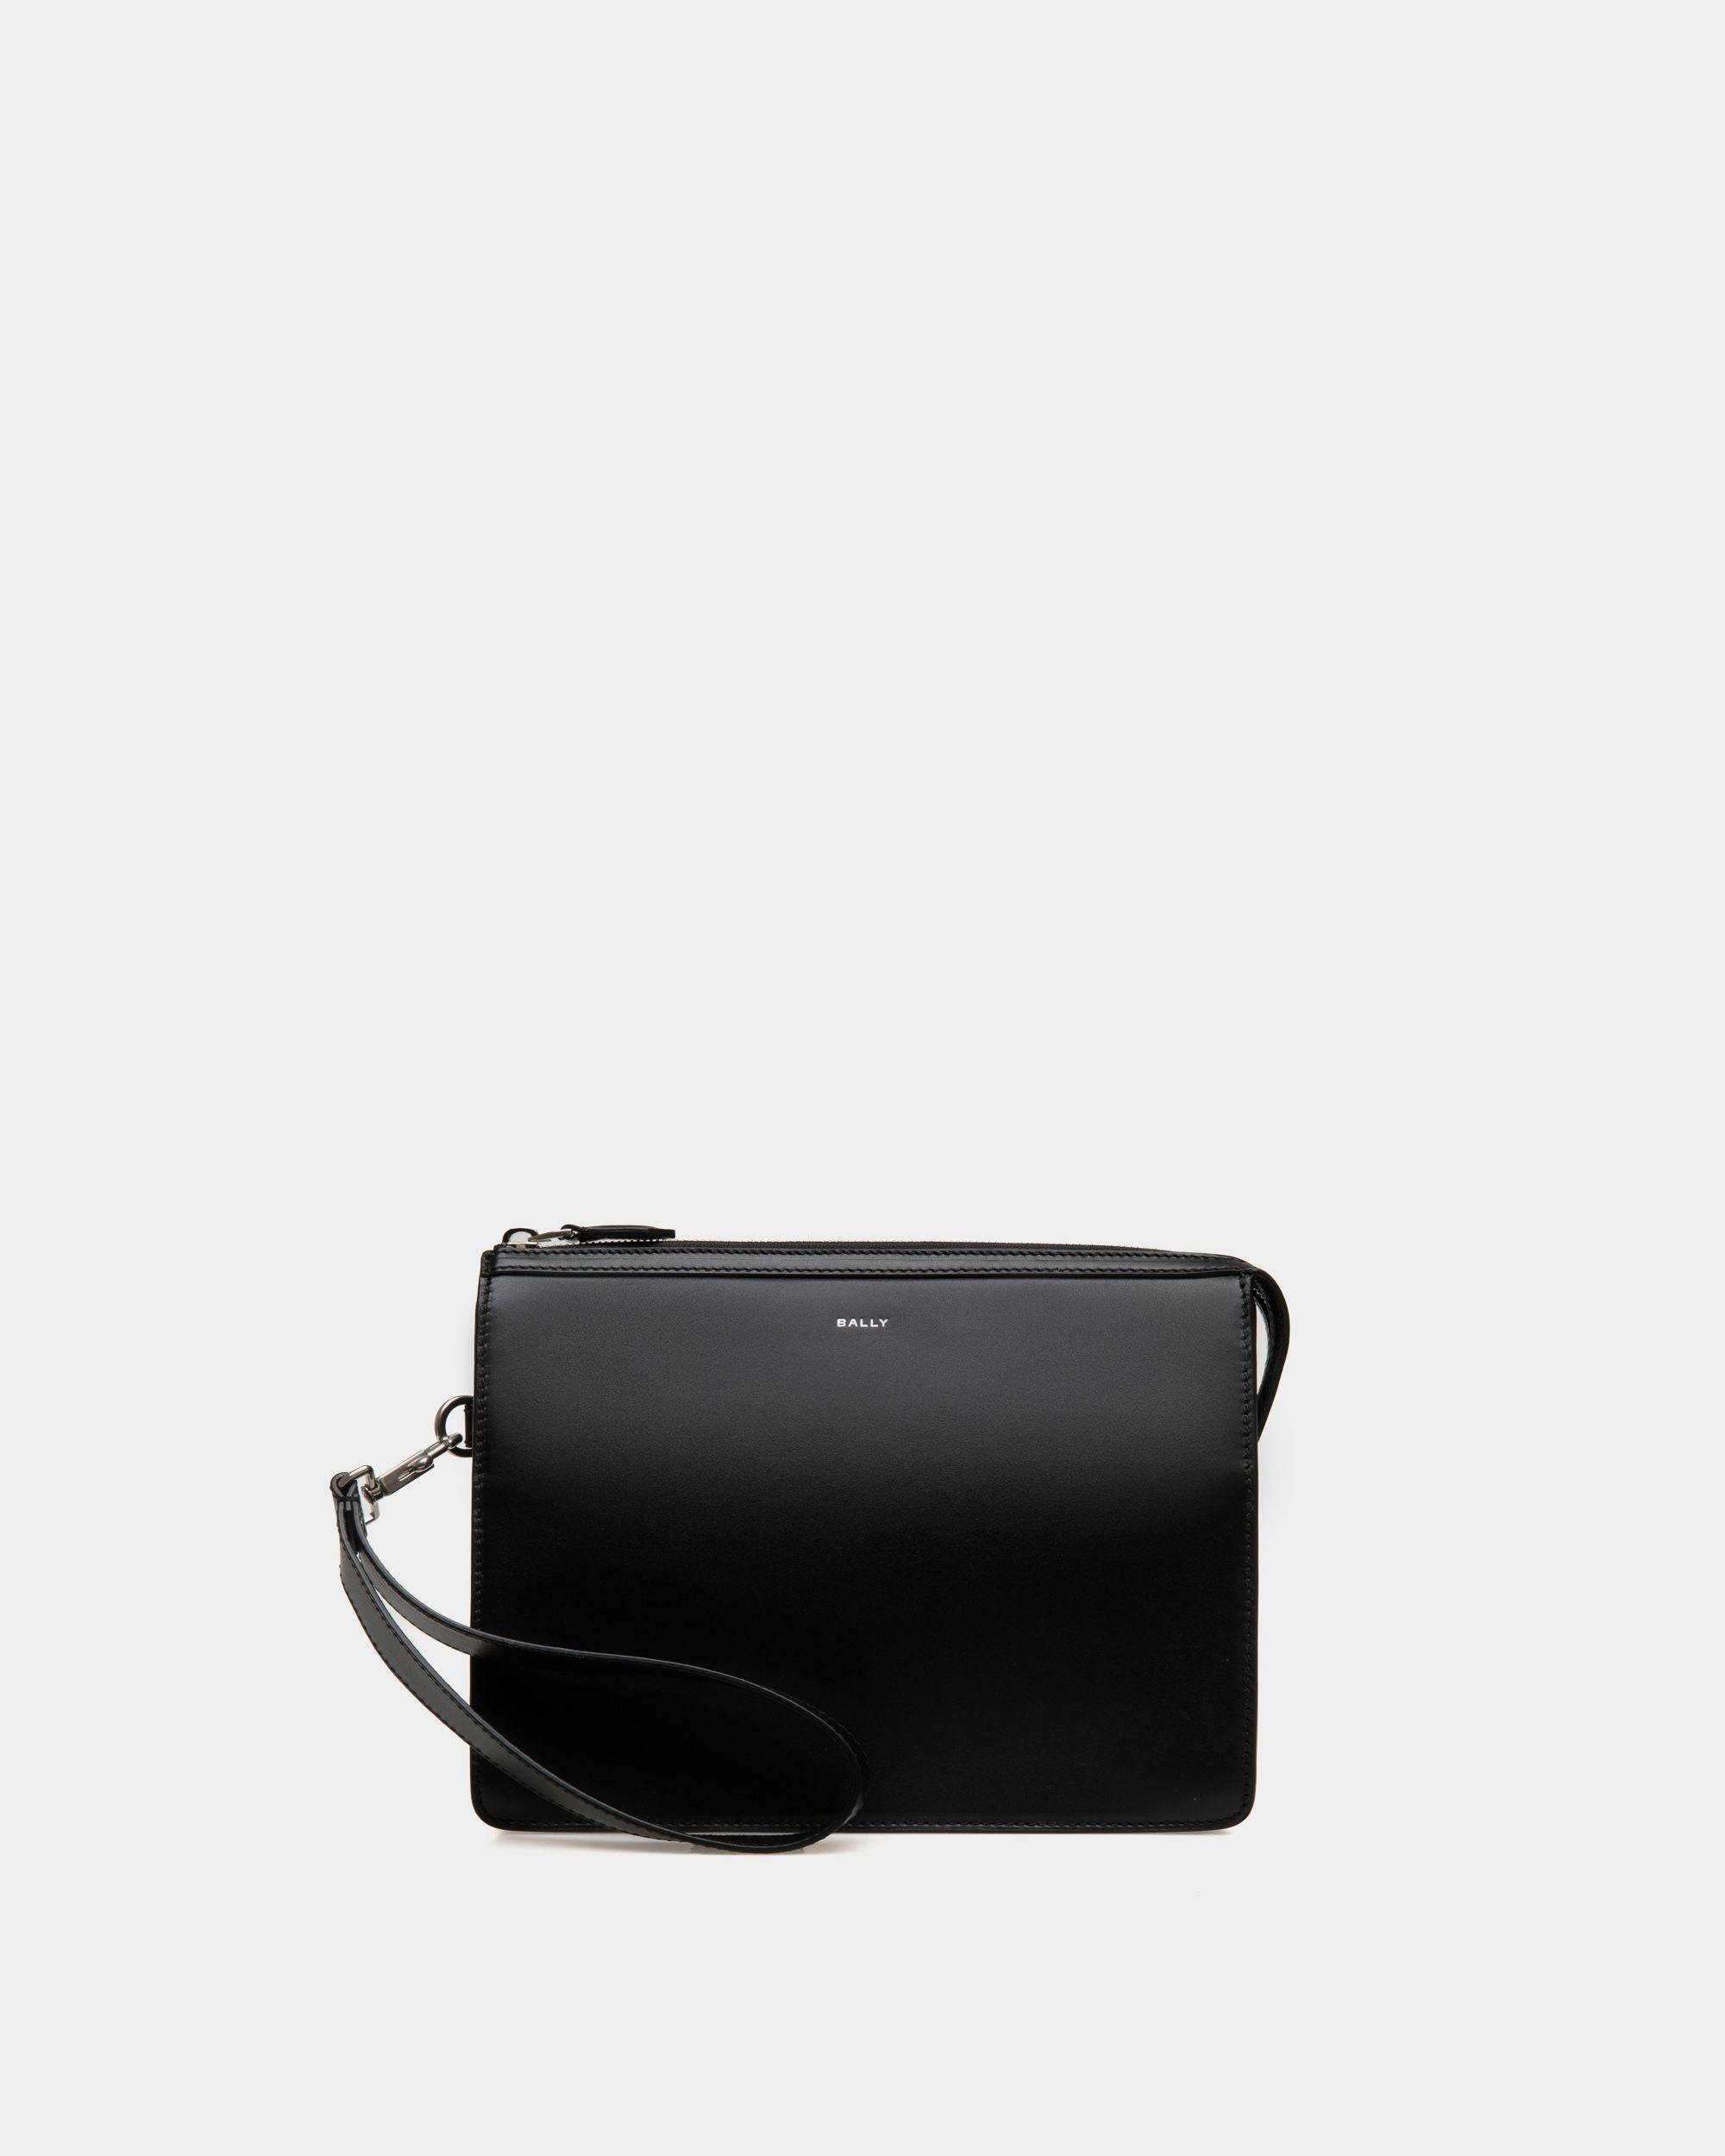 Busy Bally | Men's Pouch in Black Leather | Bally | Still Life Front